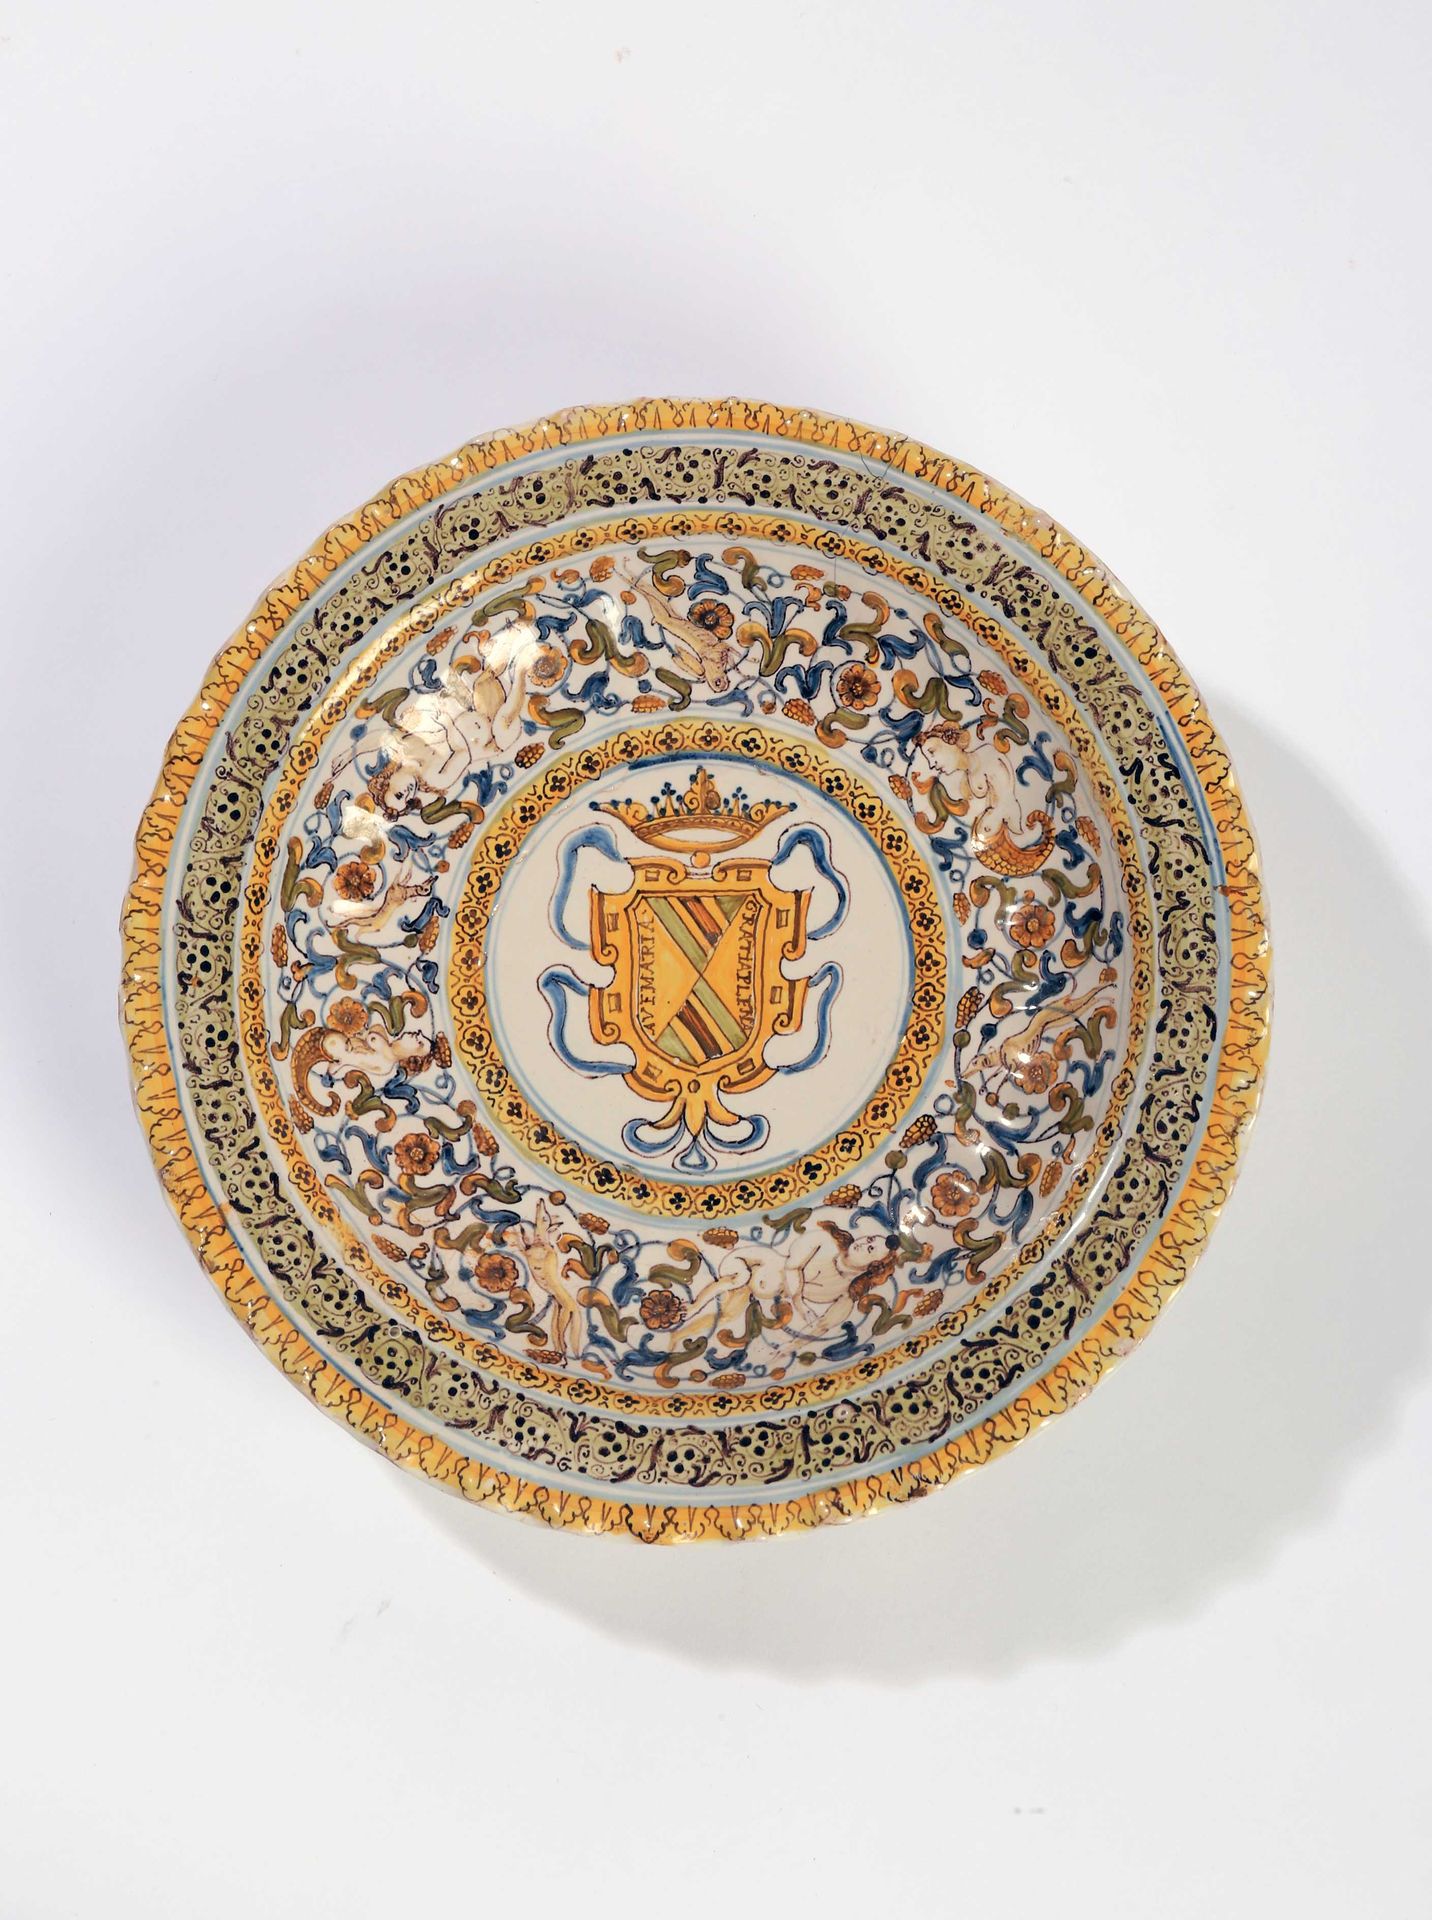 Null CASTELLI

Circular earthenware bowl with polychrome decoration in the cente&hellip;